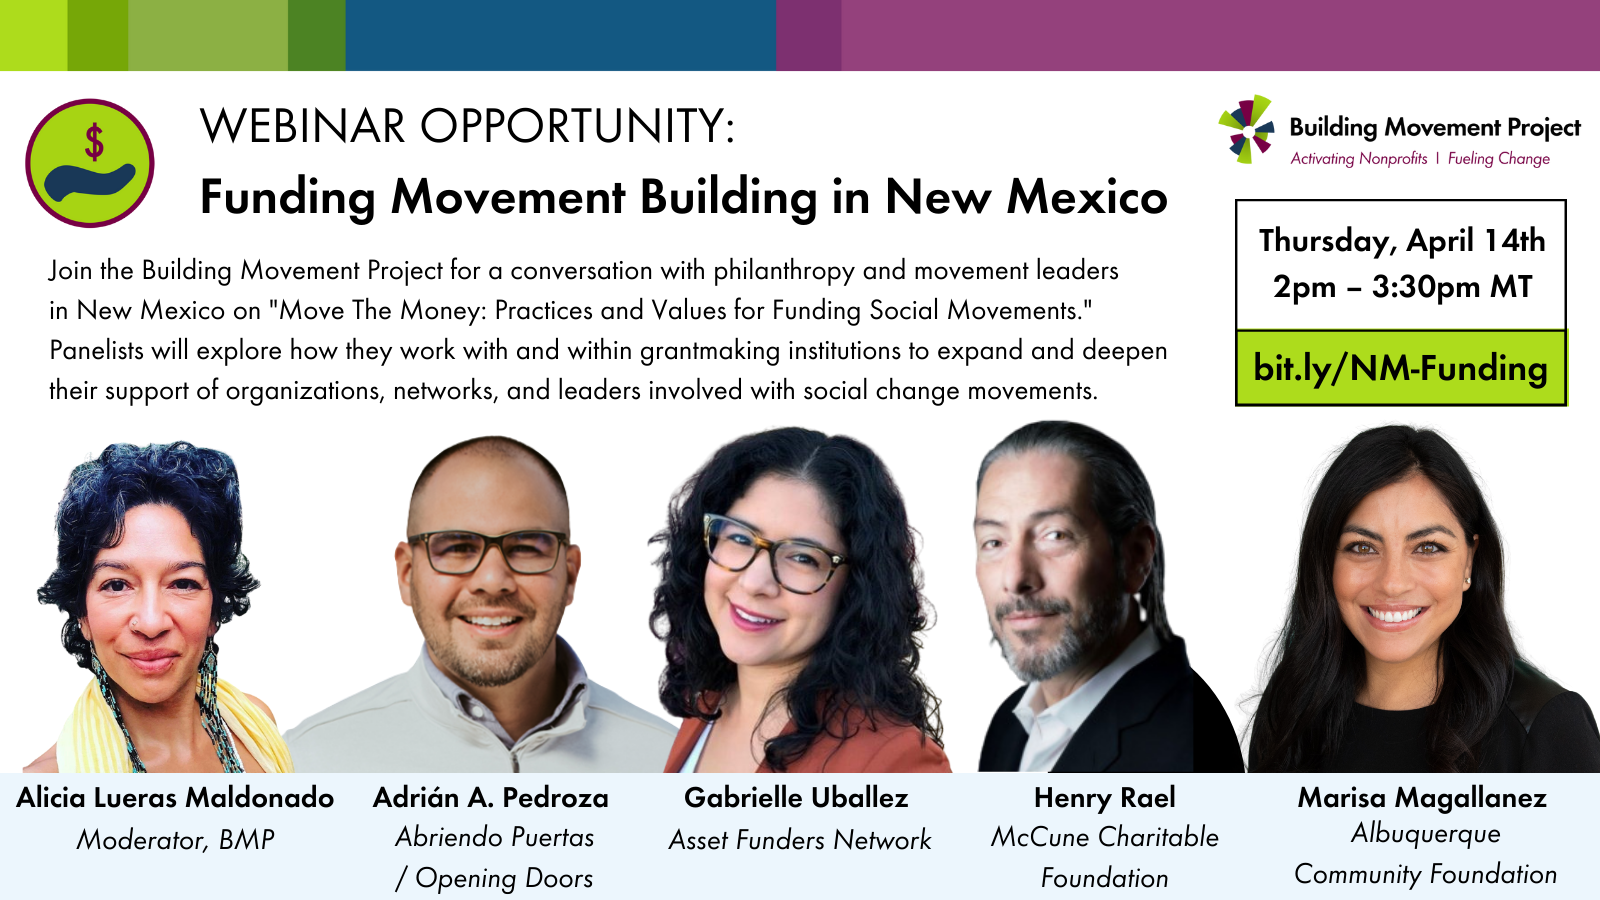 Funding Movement Building in New Mexico